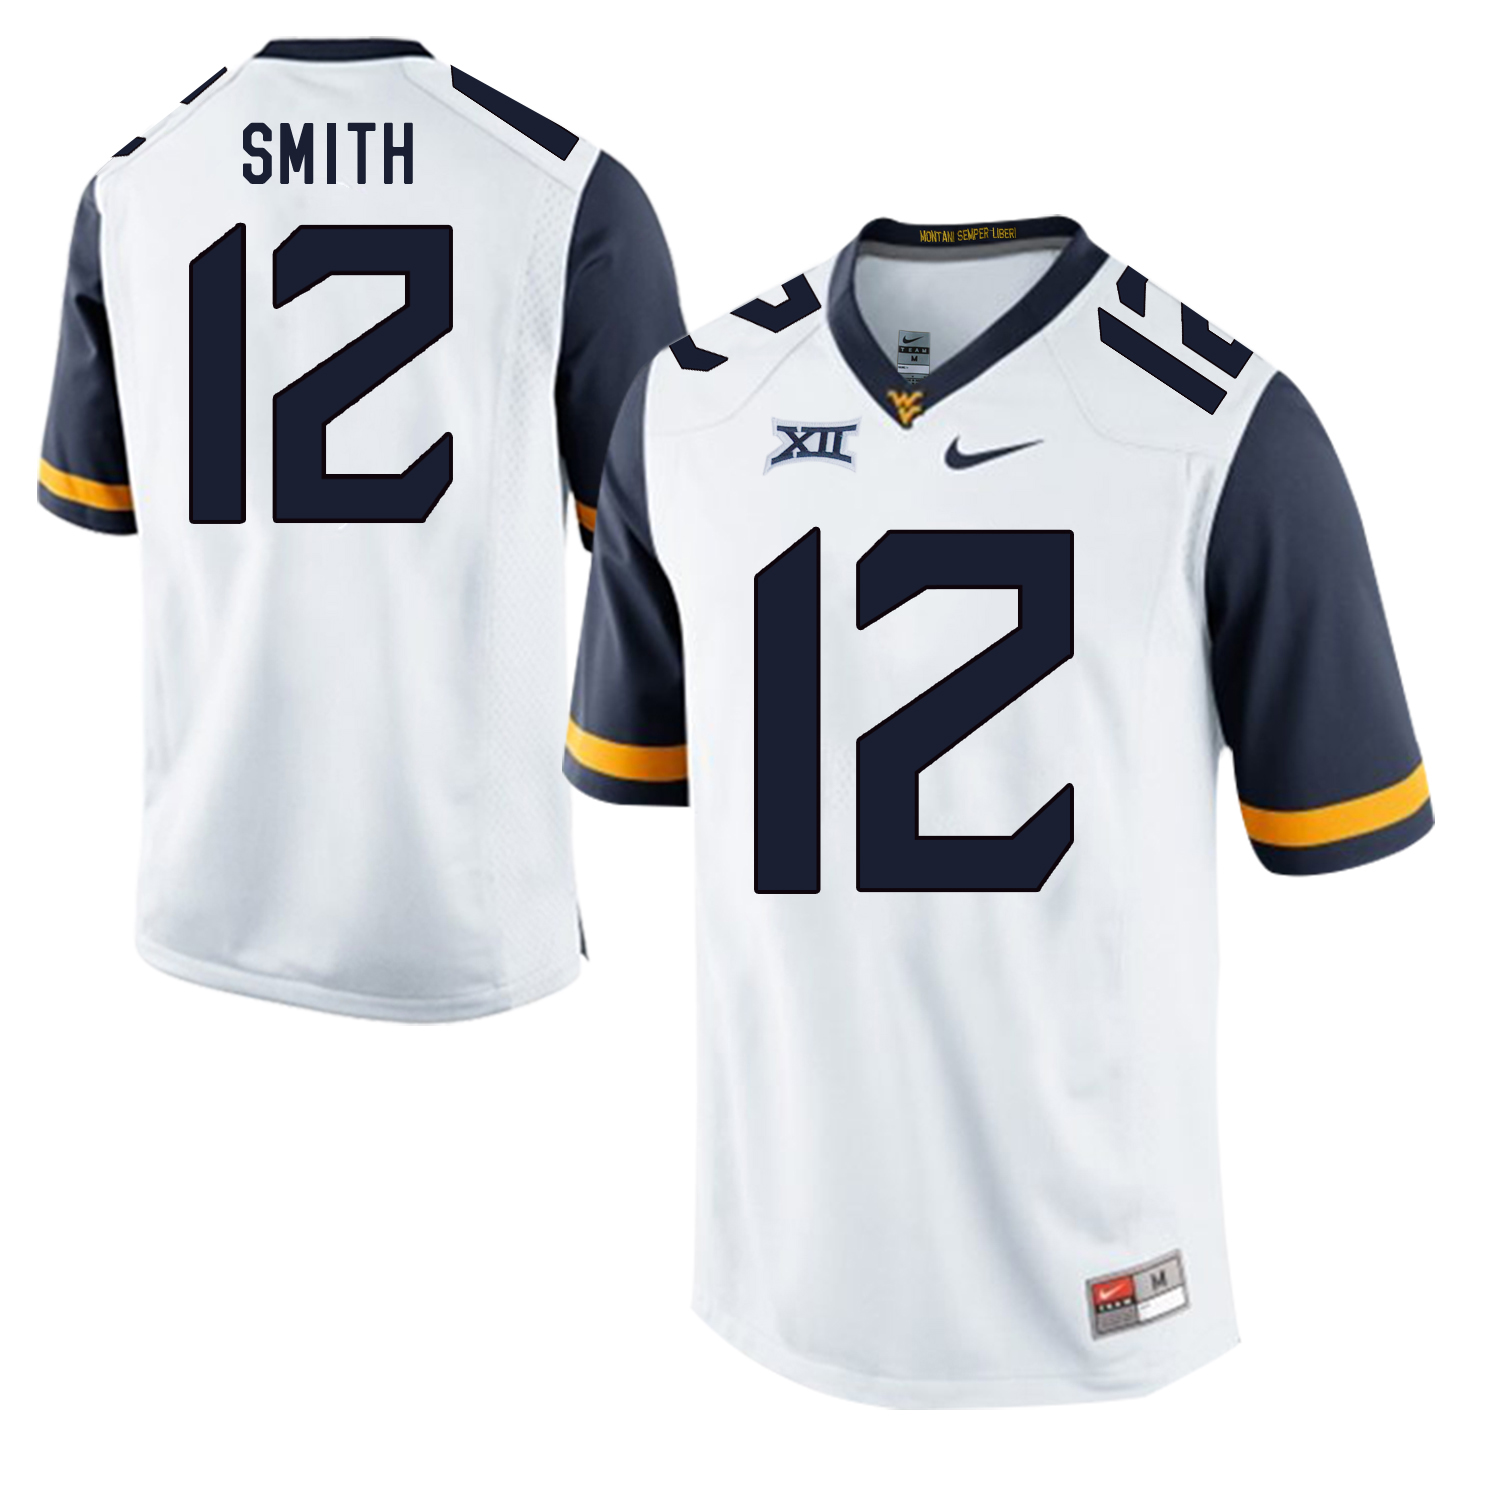 West Virginia Mountaineers 12 Geno Smith White College Football Jersey